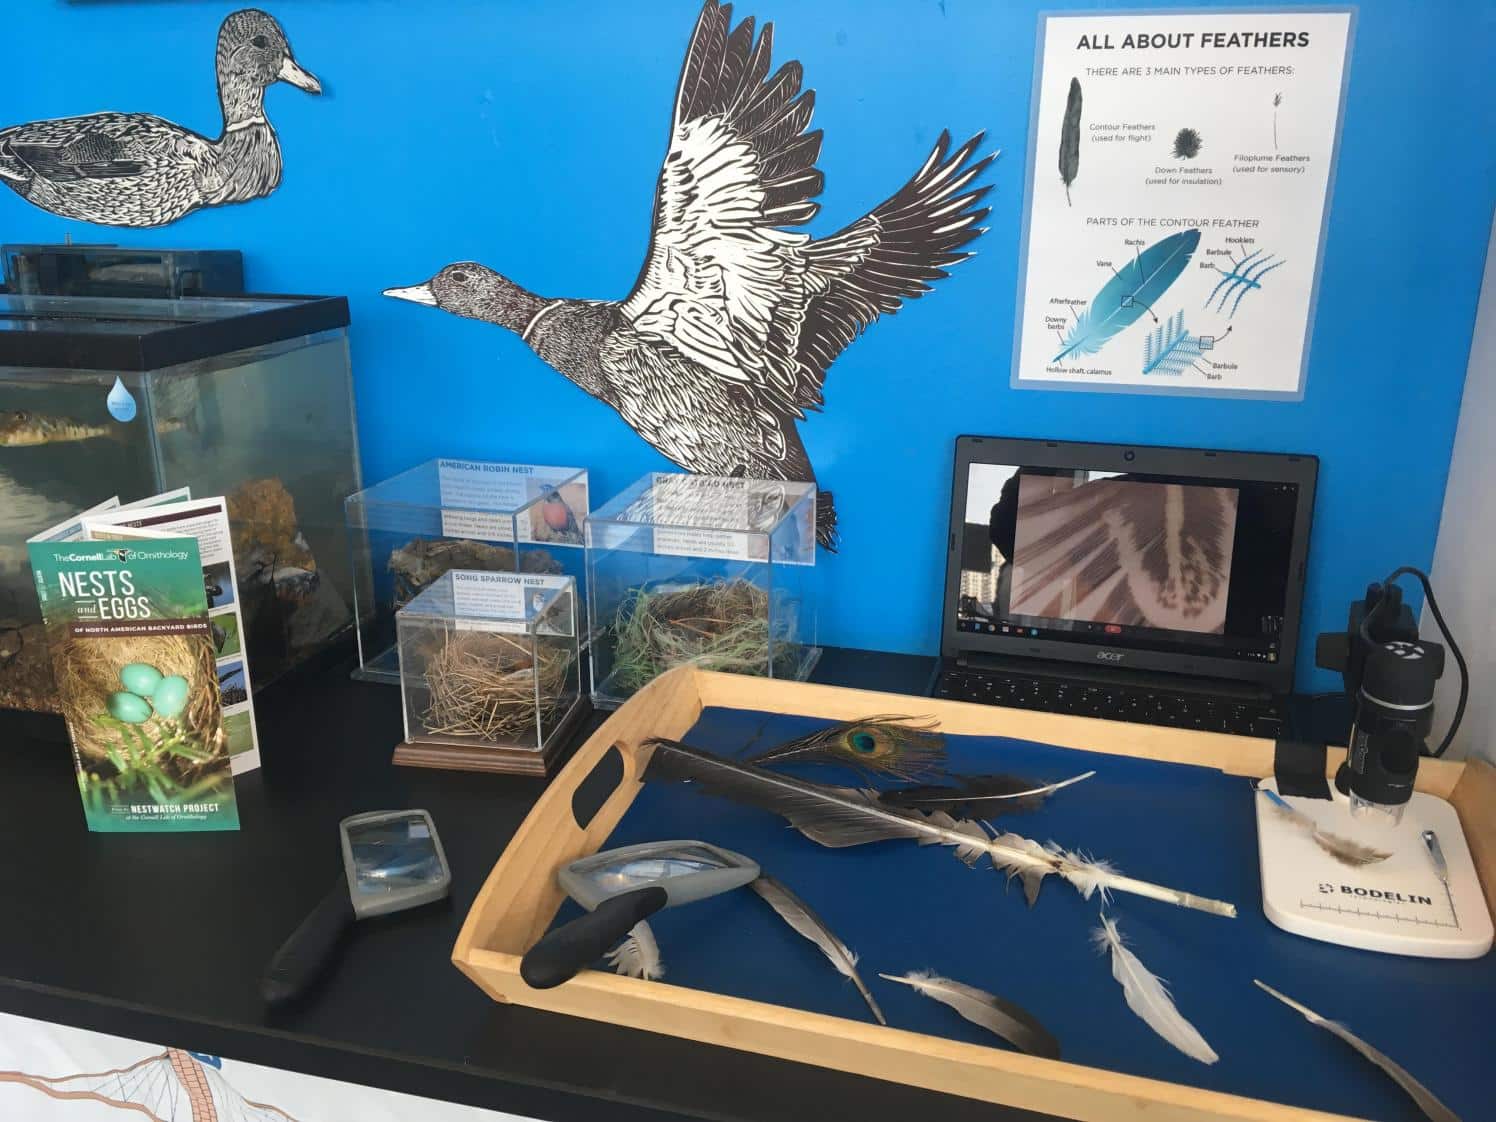 Learning exhibit about birds.